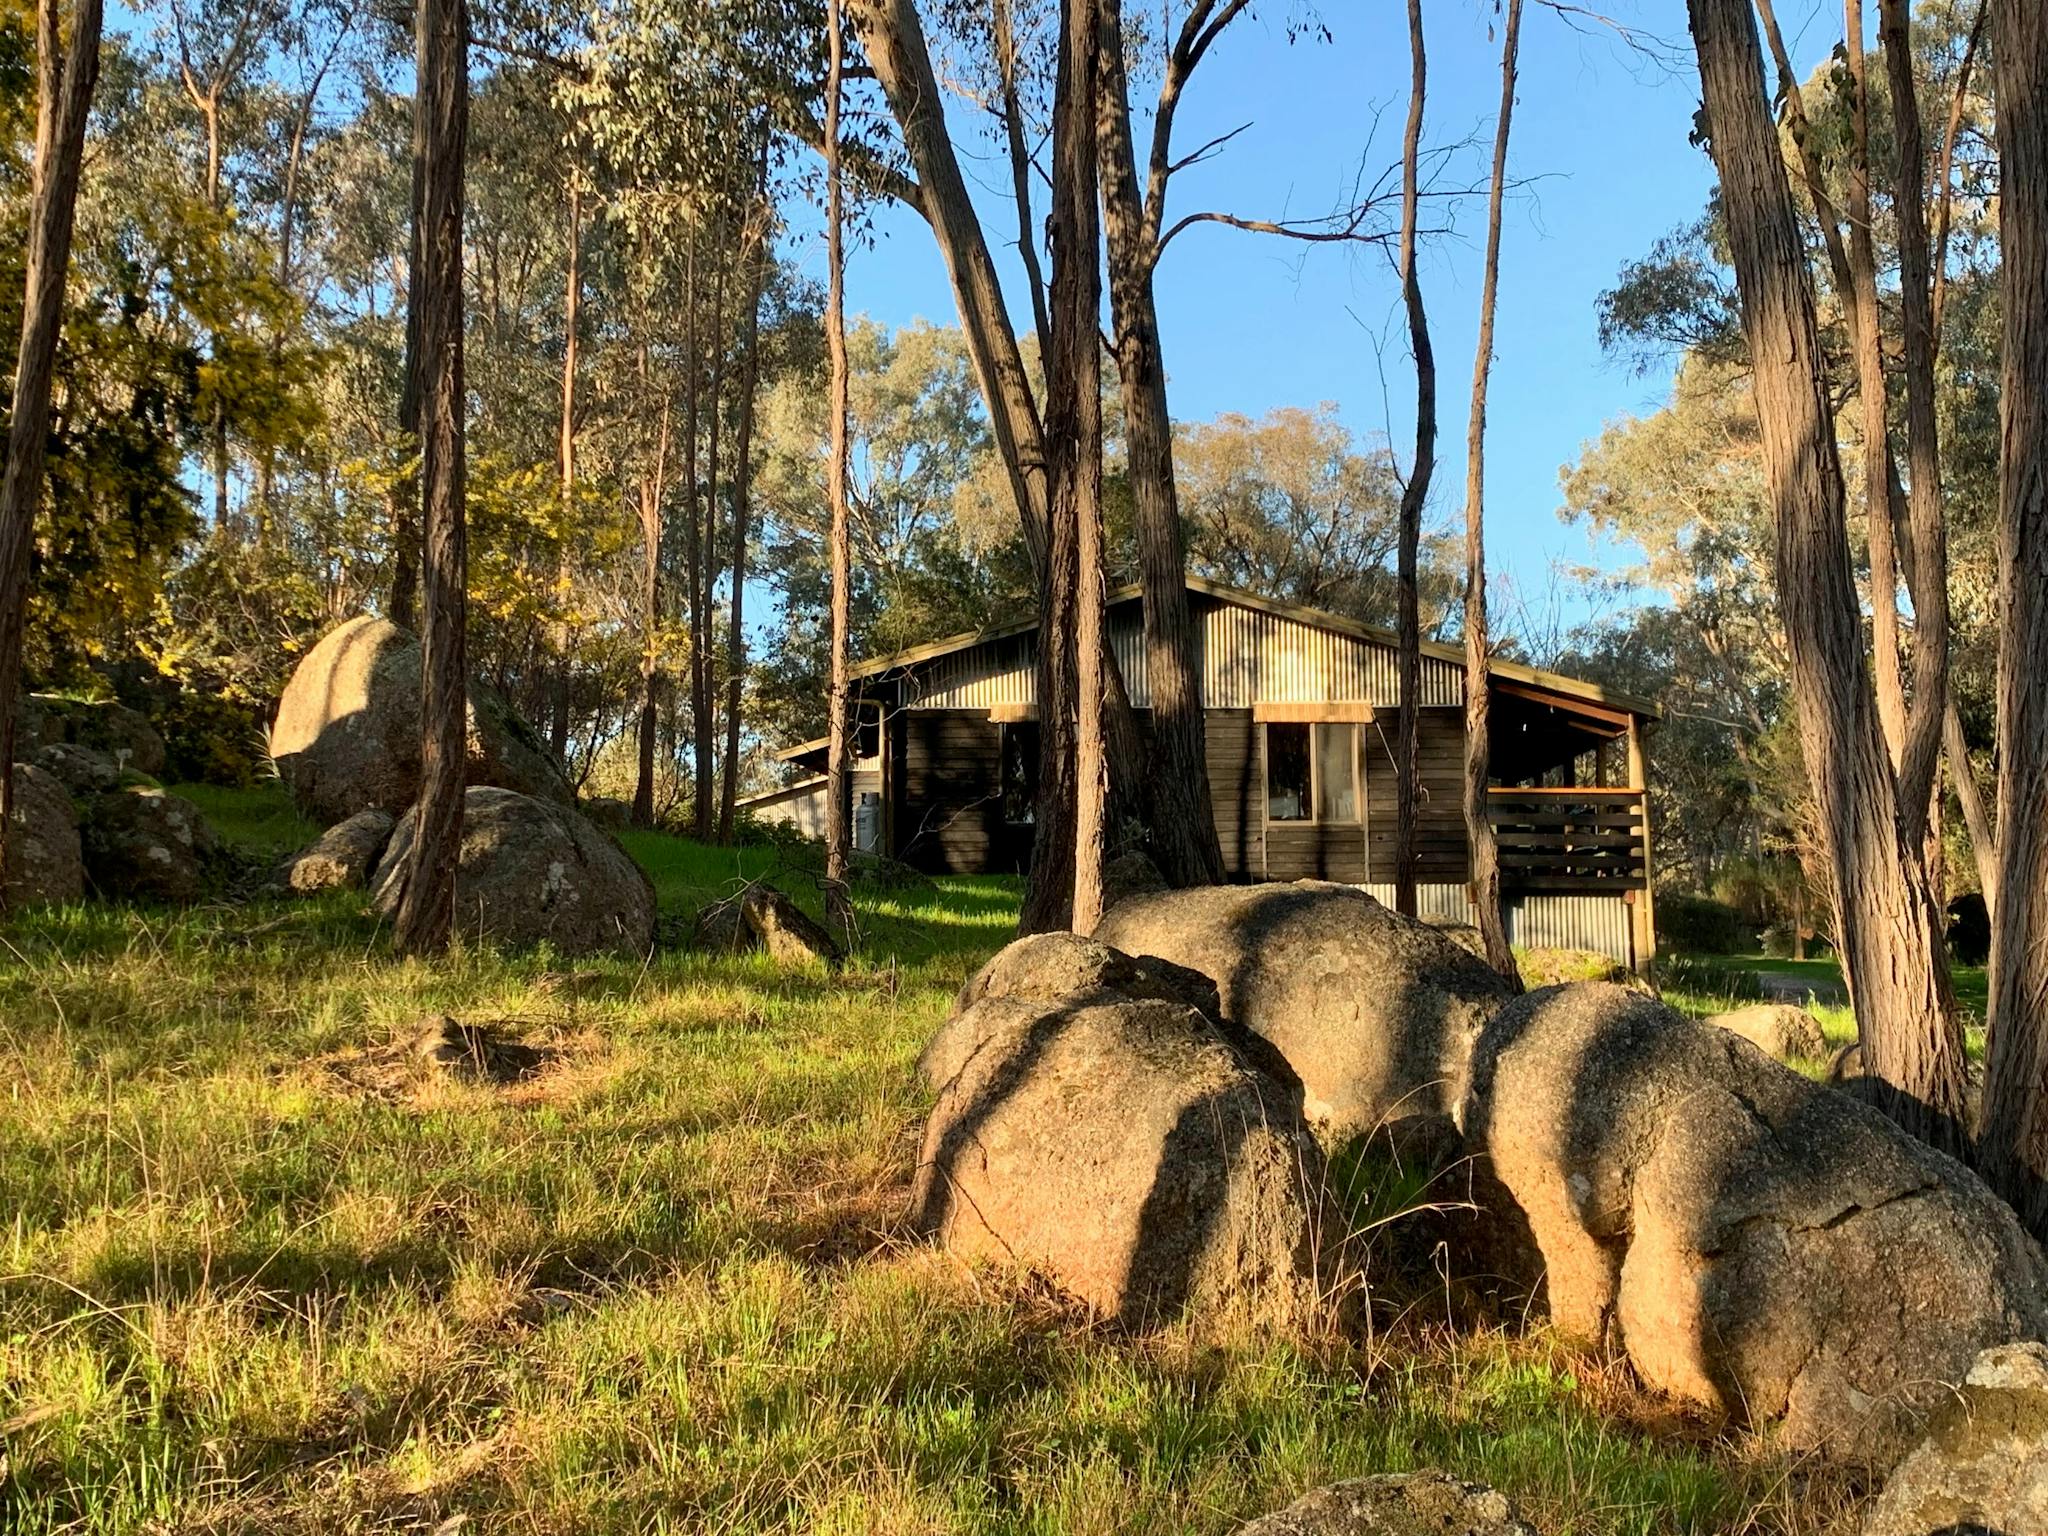 Natures playground... Cabins surrounded with large granite boulders